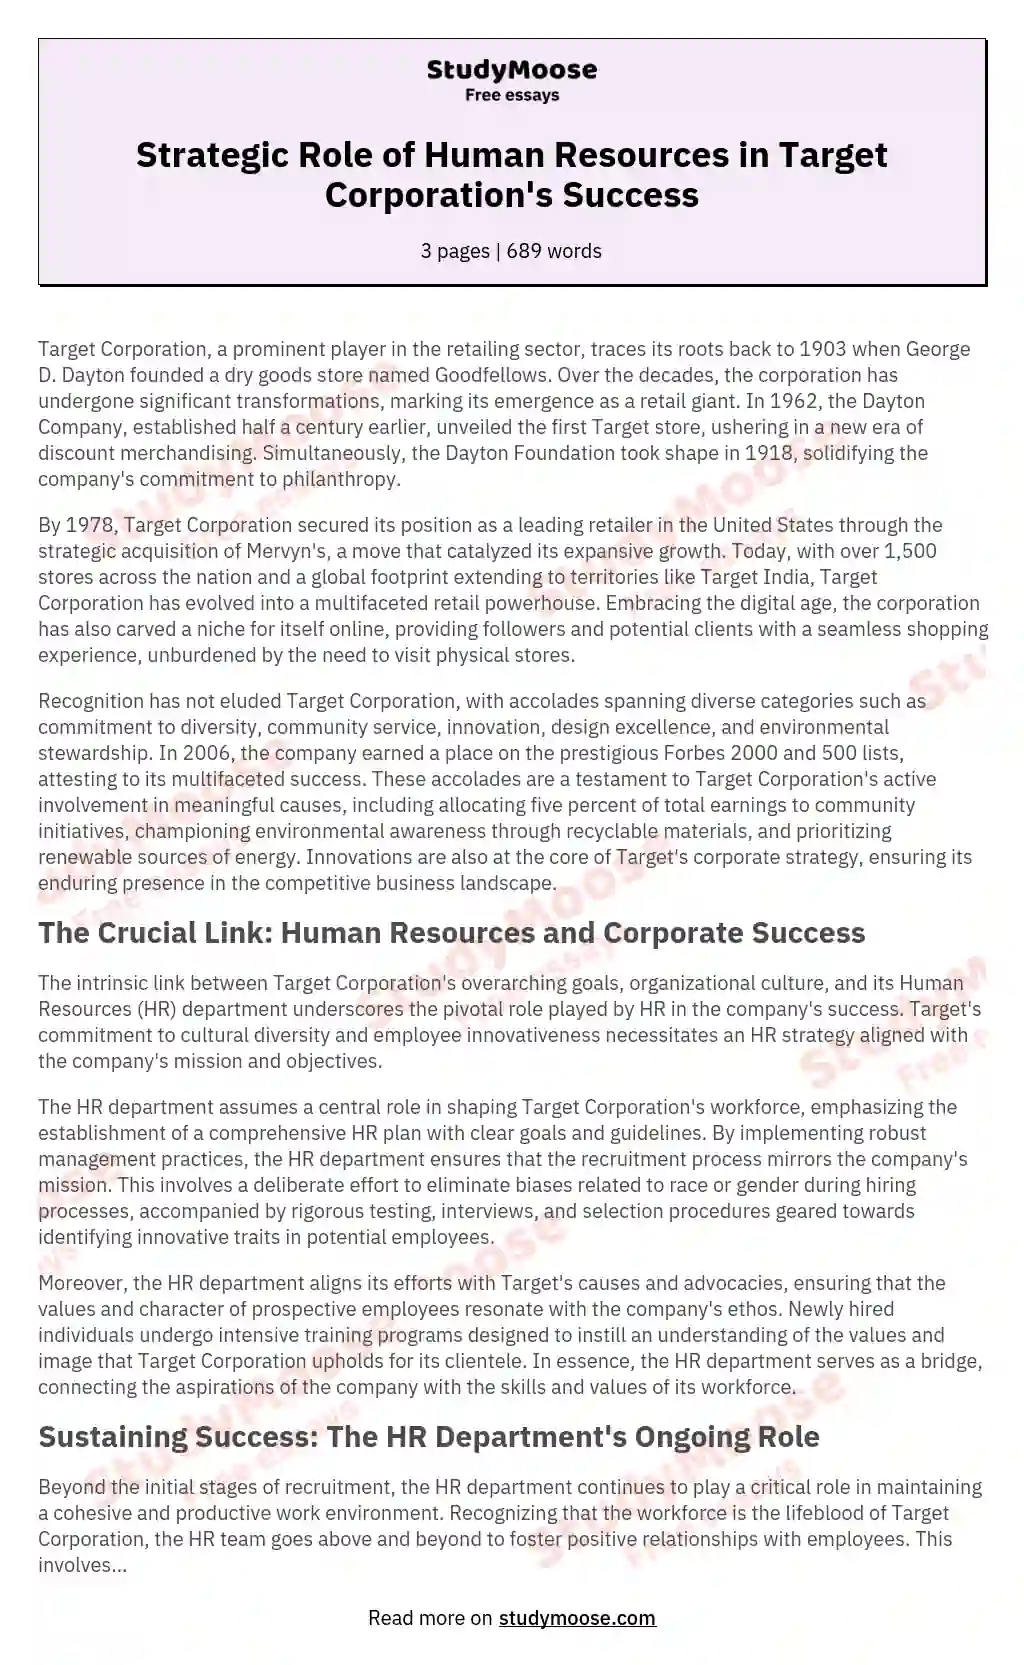 Strategic Role of Human Resources in Target Corporation's Success essay